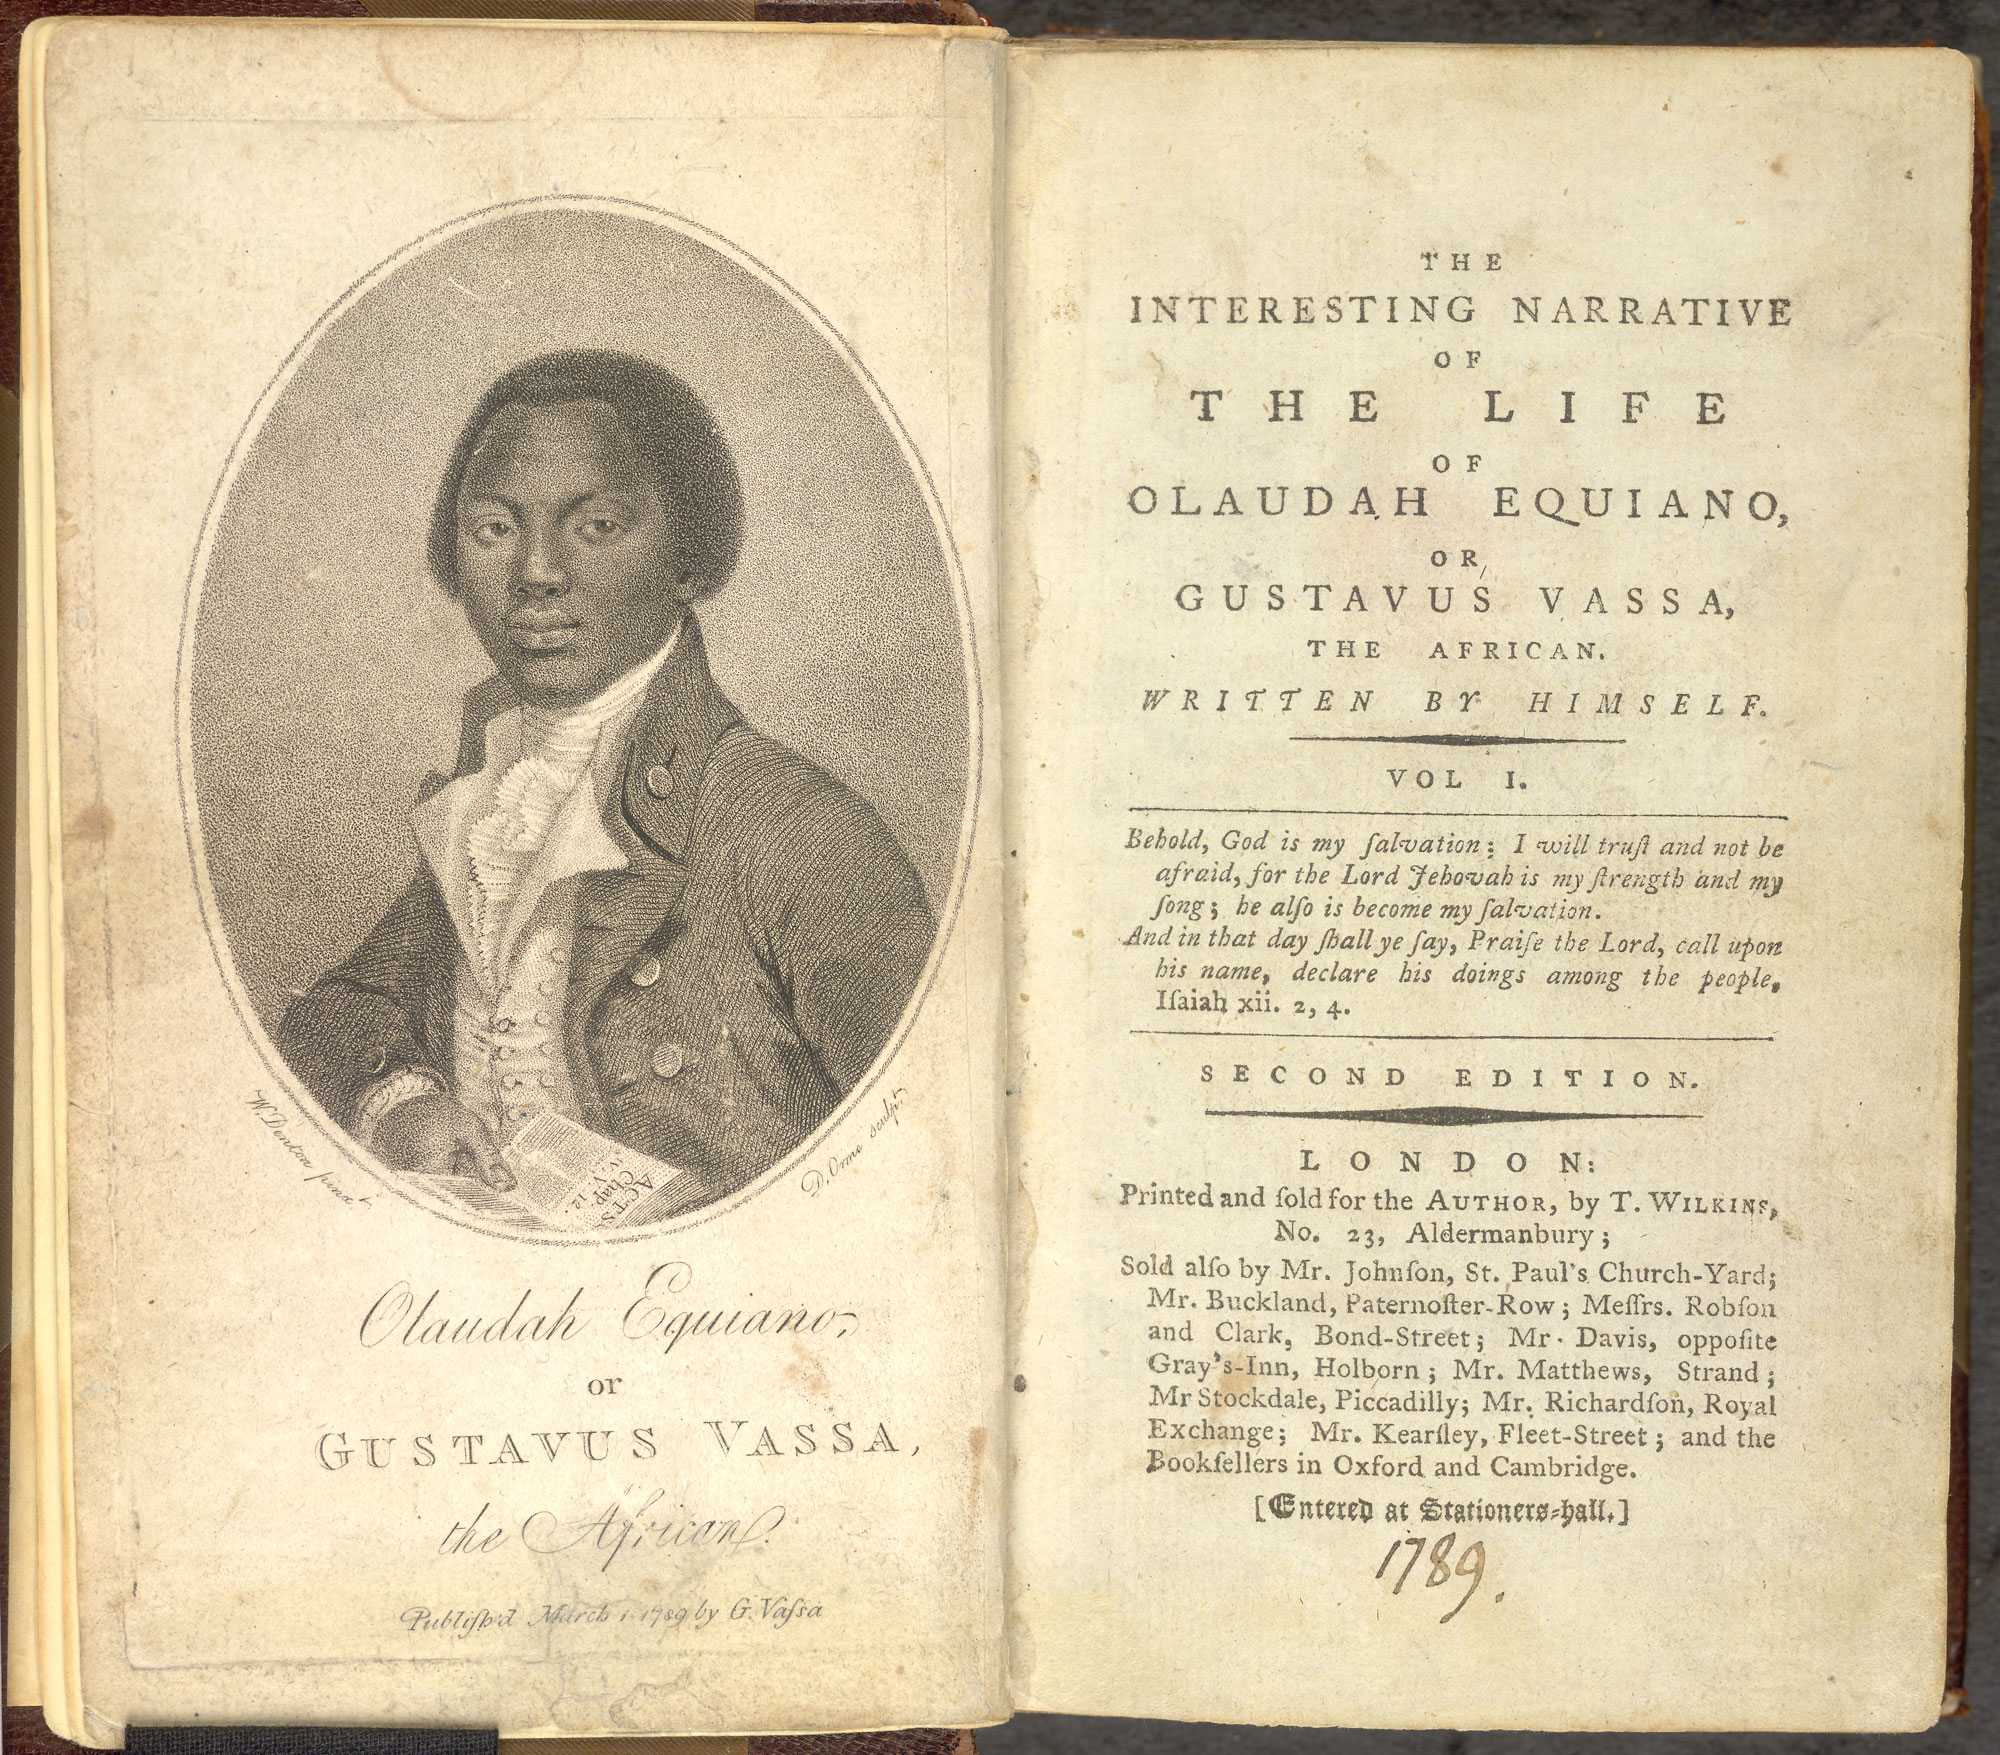 Olaudah Equiano, the Abolitionist and Author